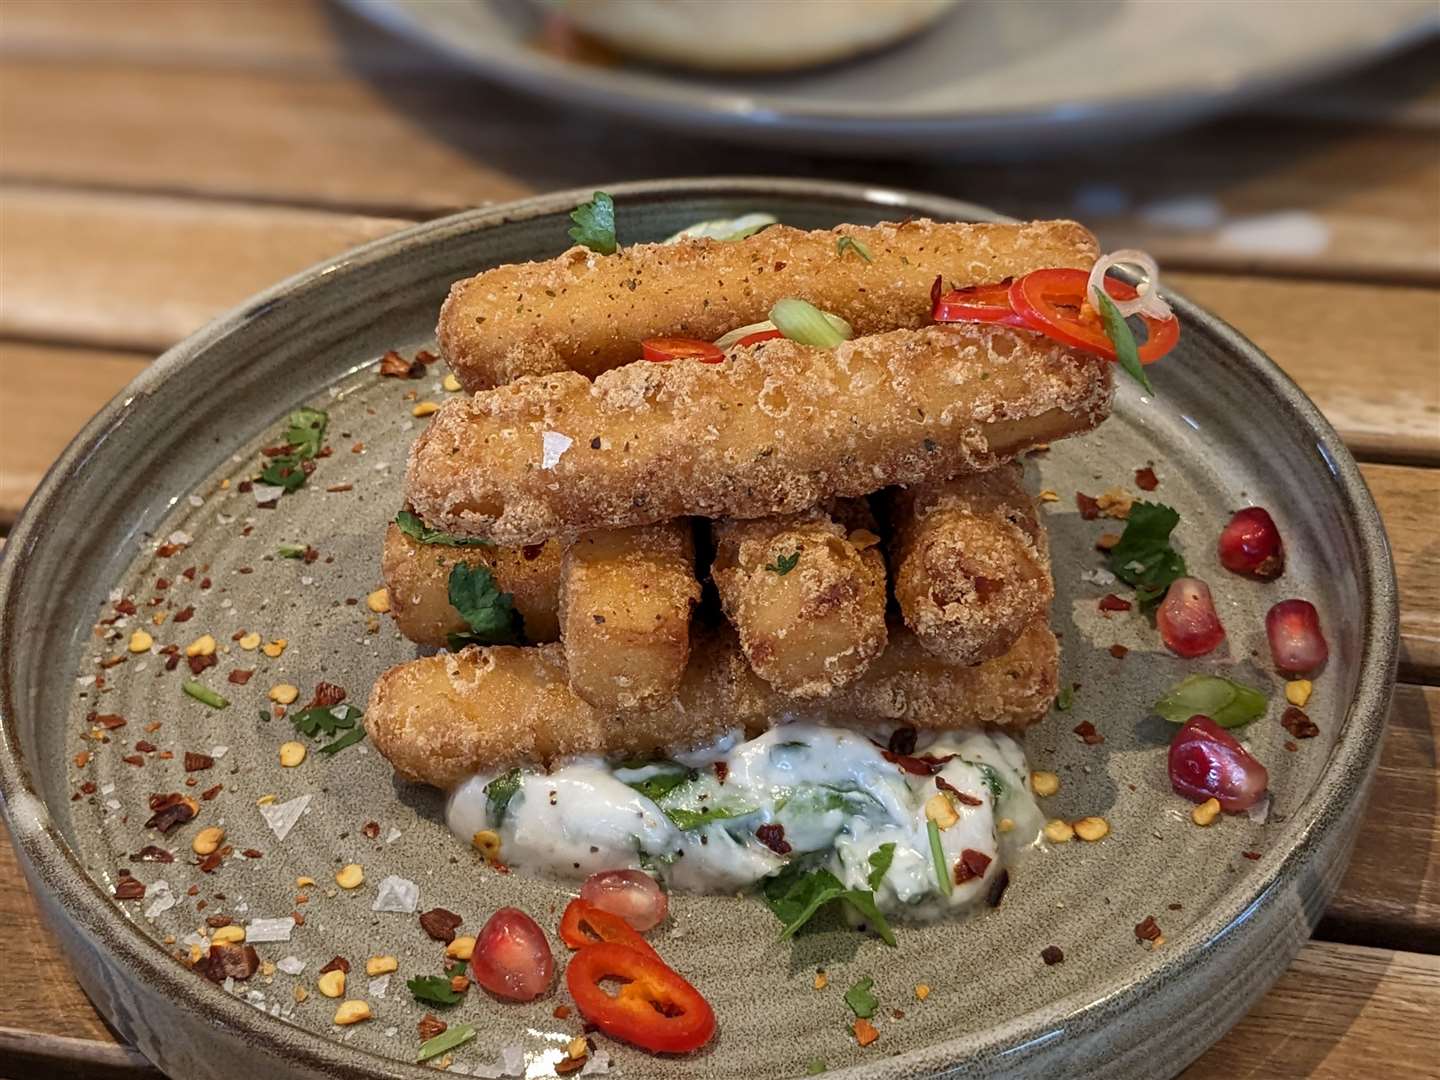 We chose the halloumi fries from the tapas menu. Picture: Suffolk News